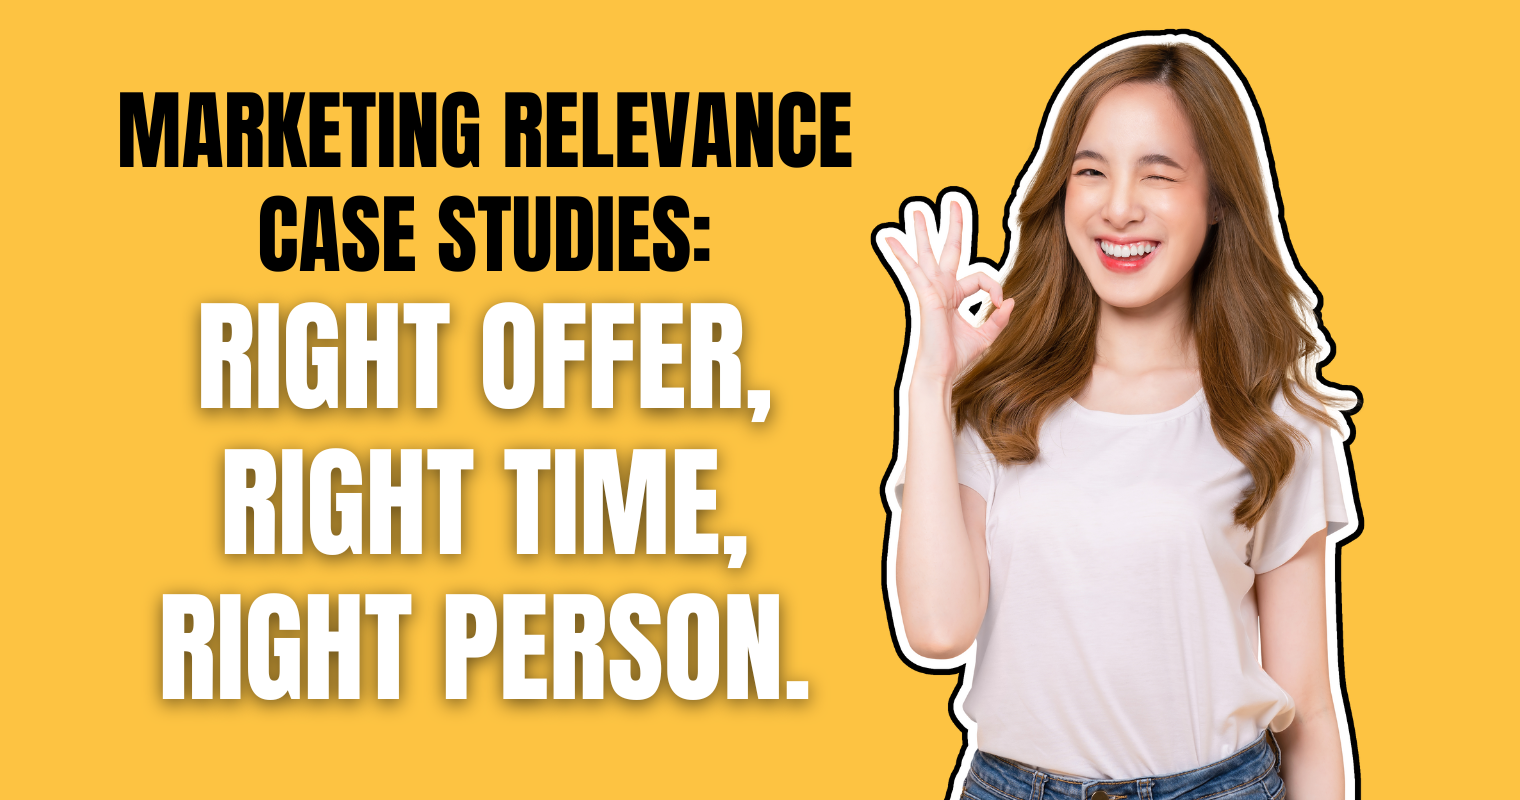 Marketing Relevance Case Studies: Right offer, right time, right person